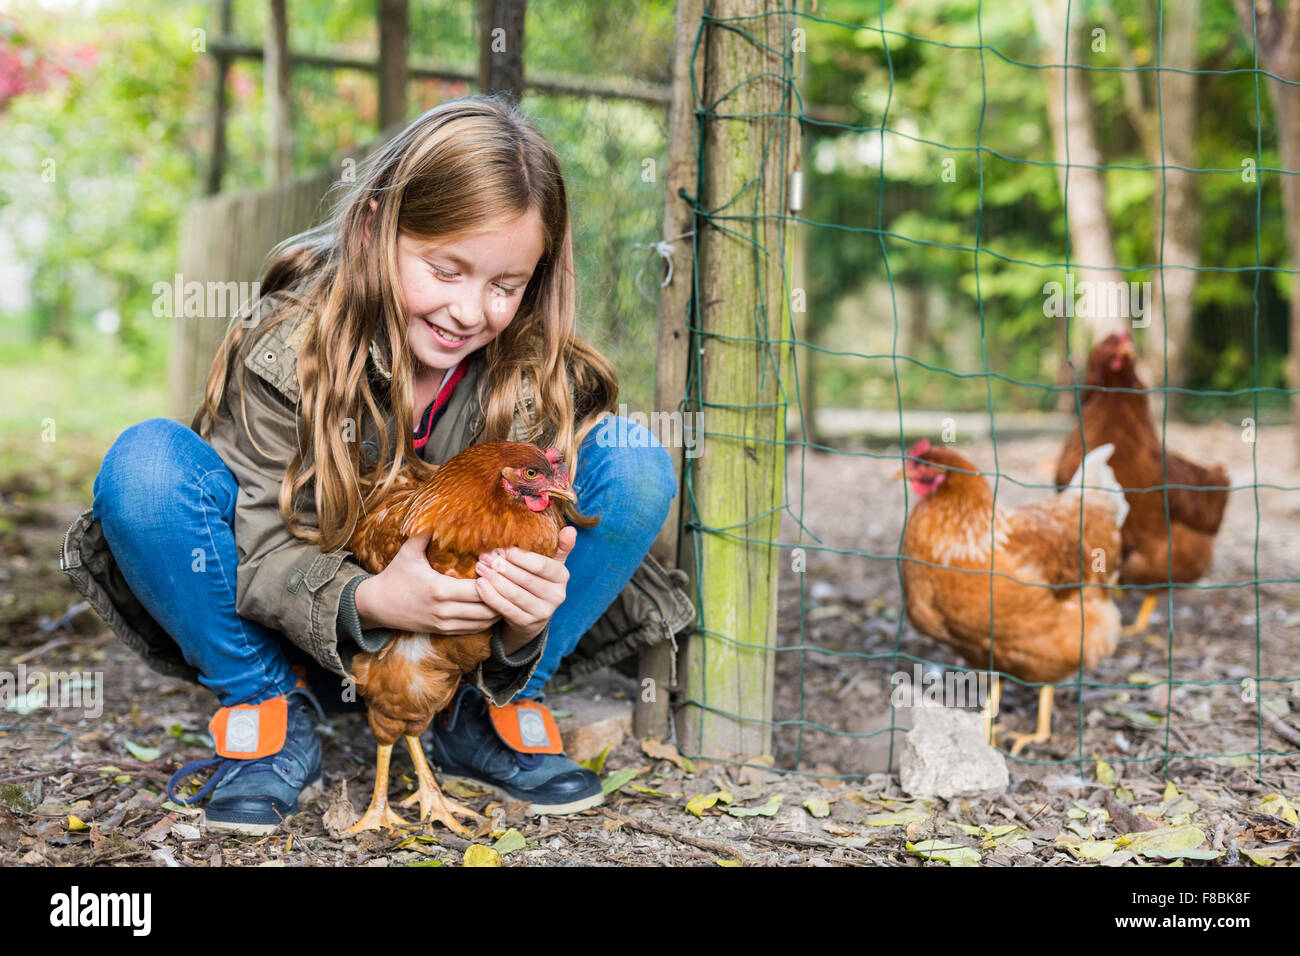 9-year-old girl with hens. Stock Photo